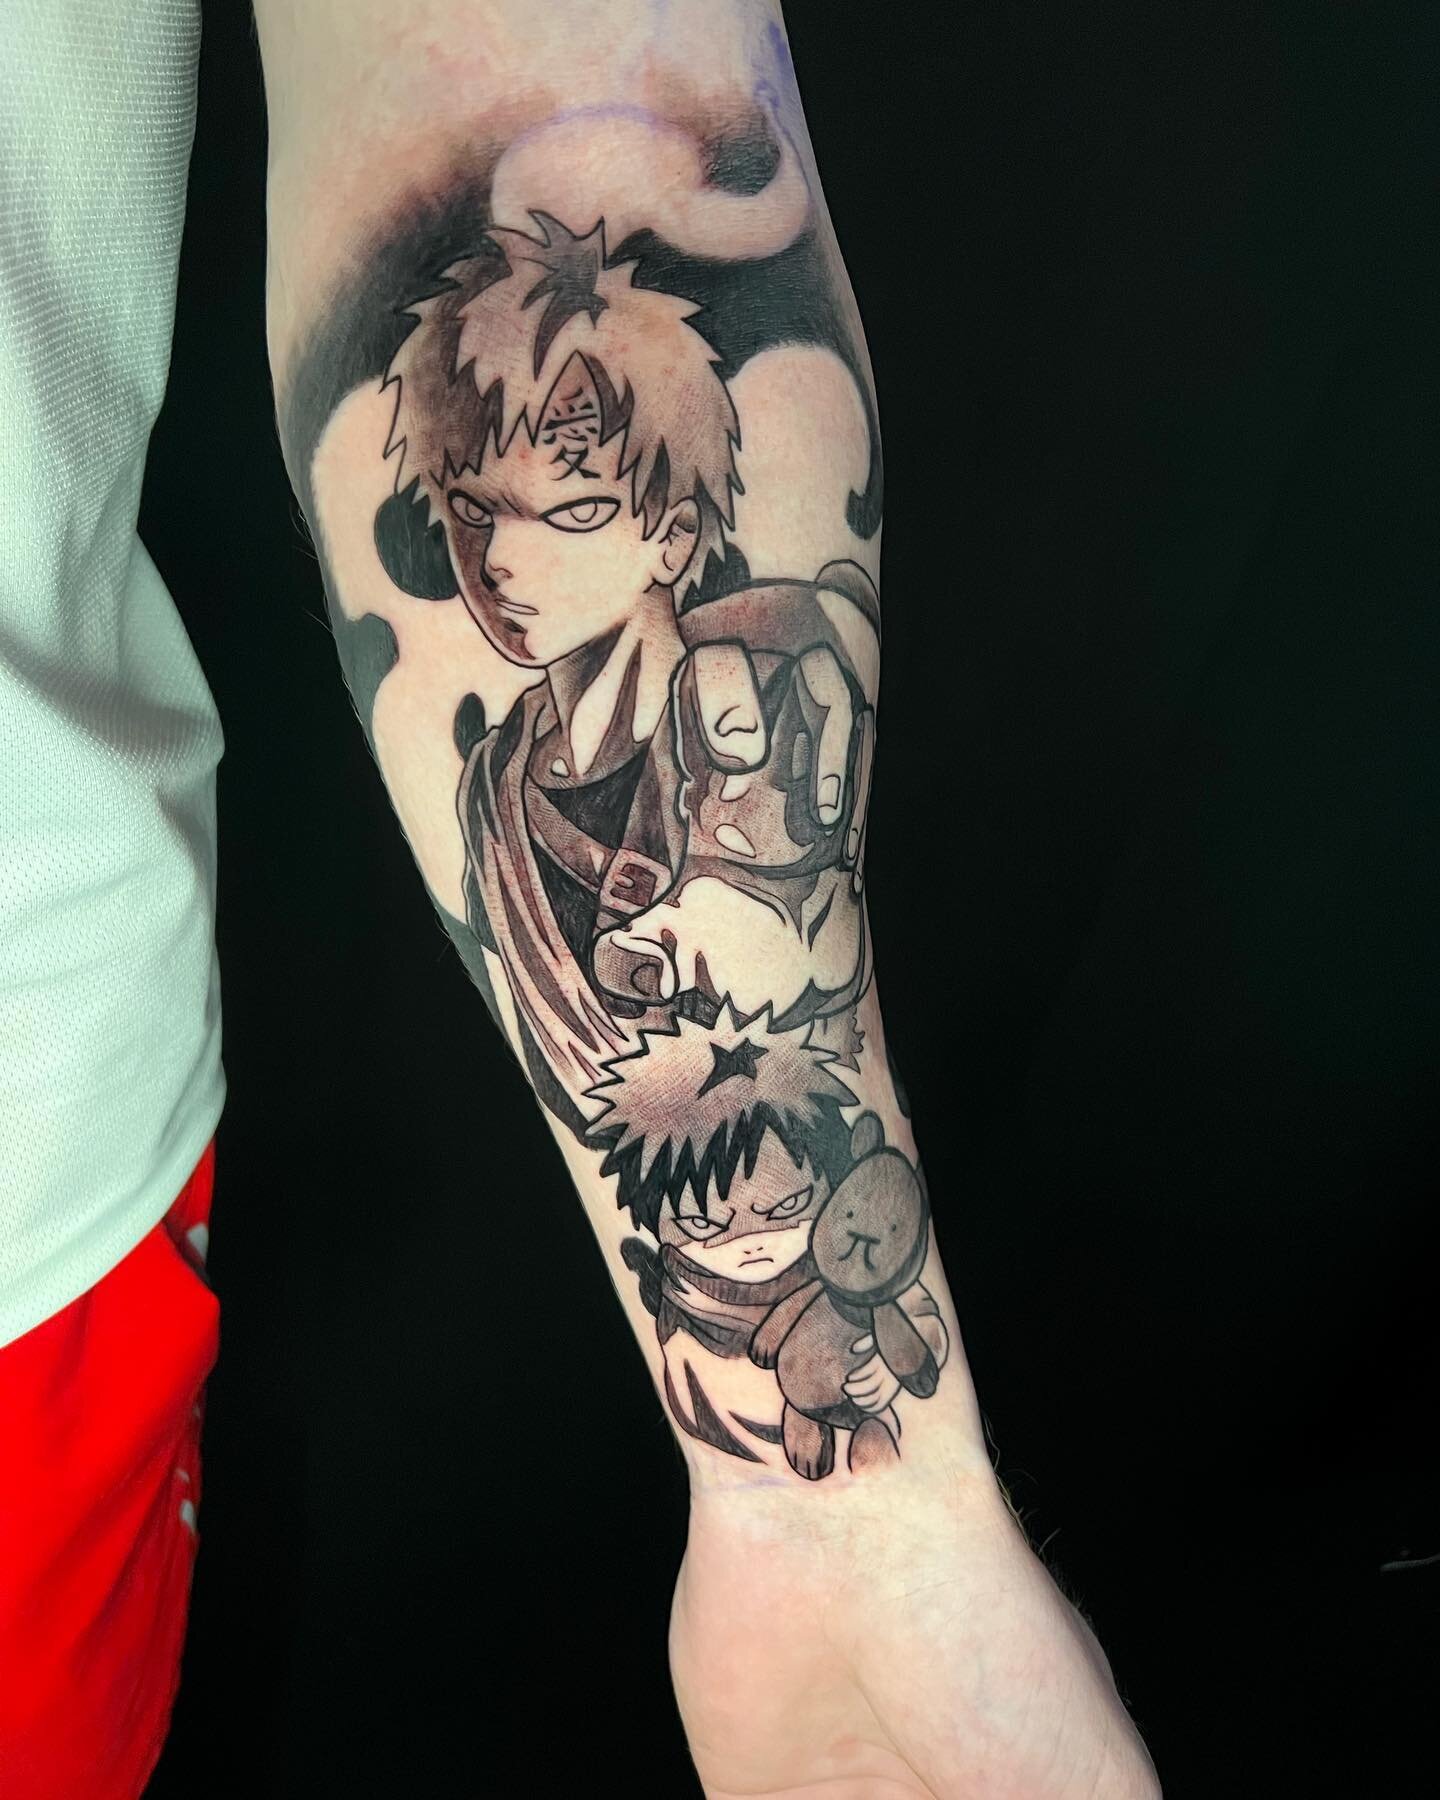 Anime forearms are some of my favorite!! Hit me up, I have a couple spots left in December for some work and booking 2023! 

#tattoo #tattoos #ink #anime #tattooing #delraybeach #videogametatts @videogametatts @pittsburghtattooexpo @dynamiccolor